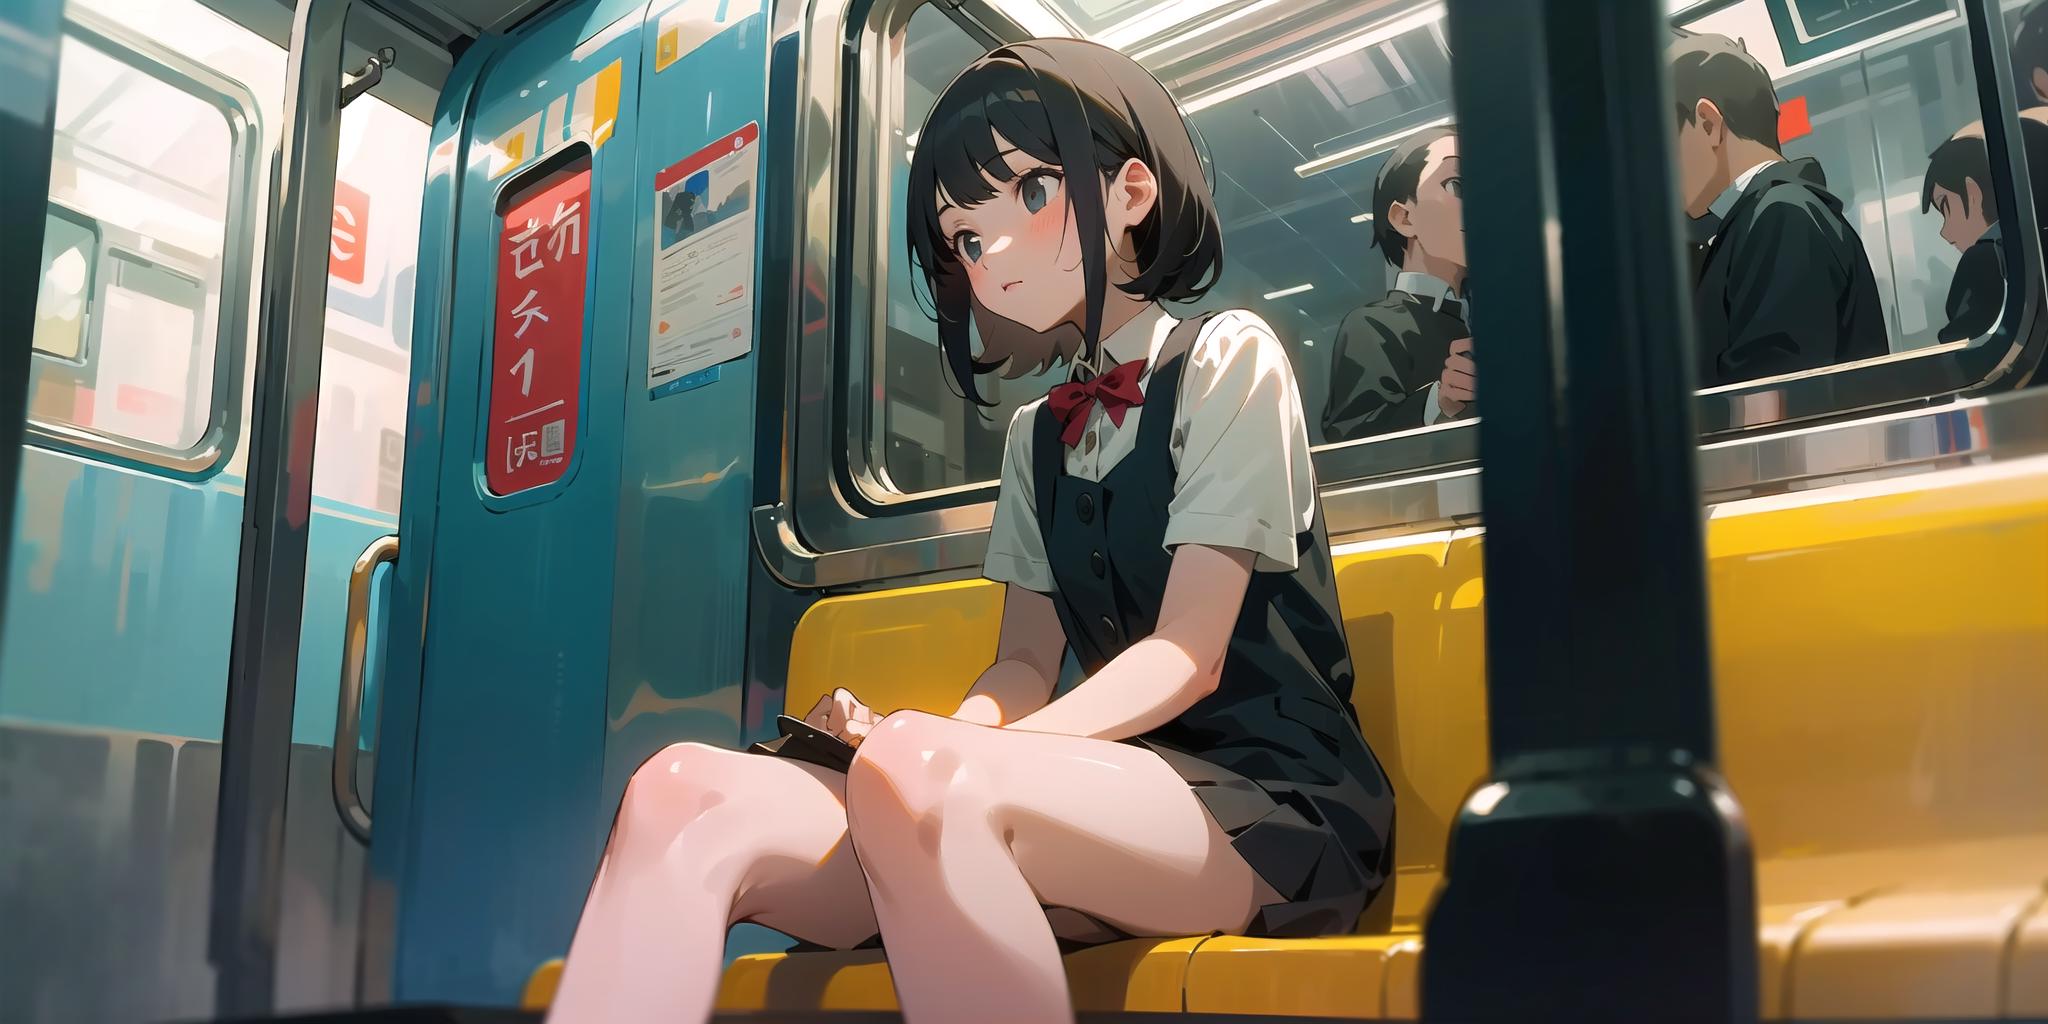 A young girl sitting on a yellow seat on a subway train.